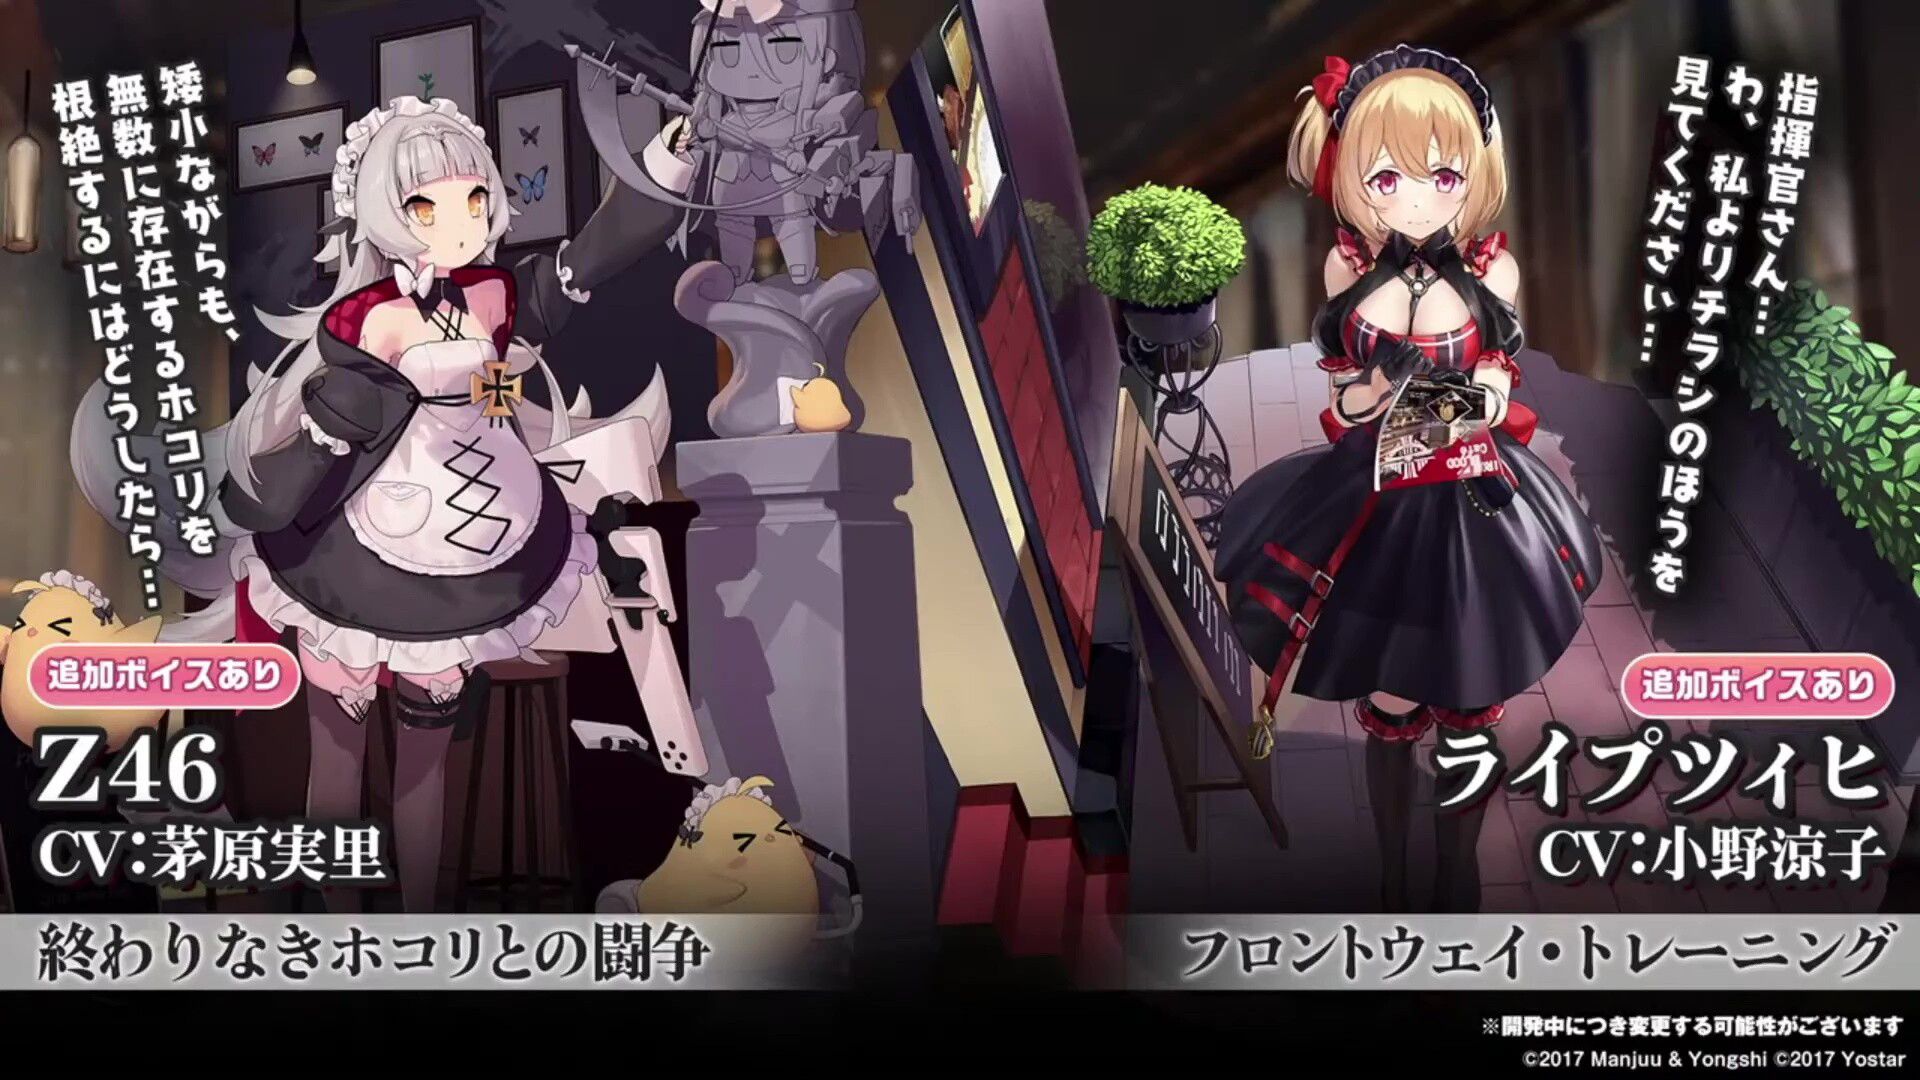 Erotic costumes such as "Azur Lane" erotic new character, whipmuchiro Santa and whipmuchi erotic maid clothes 20